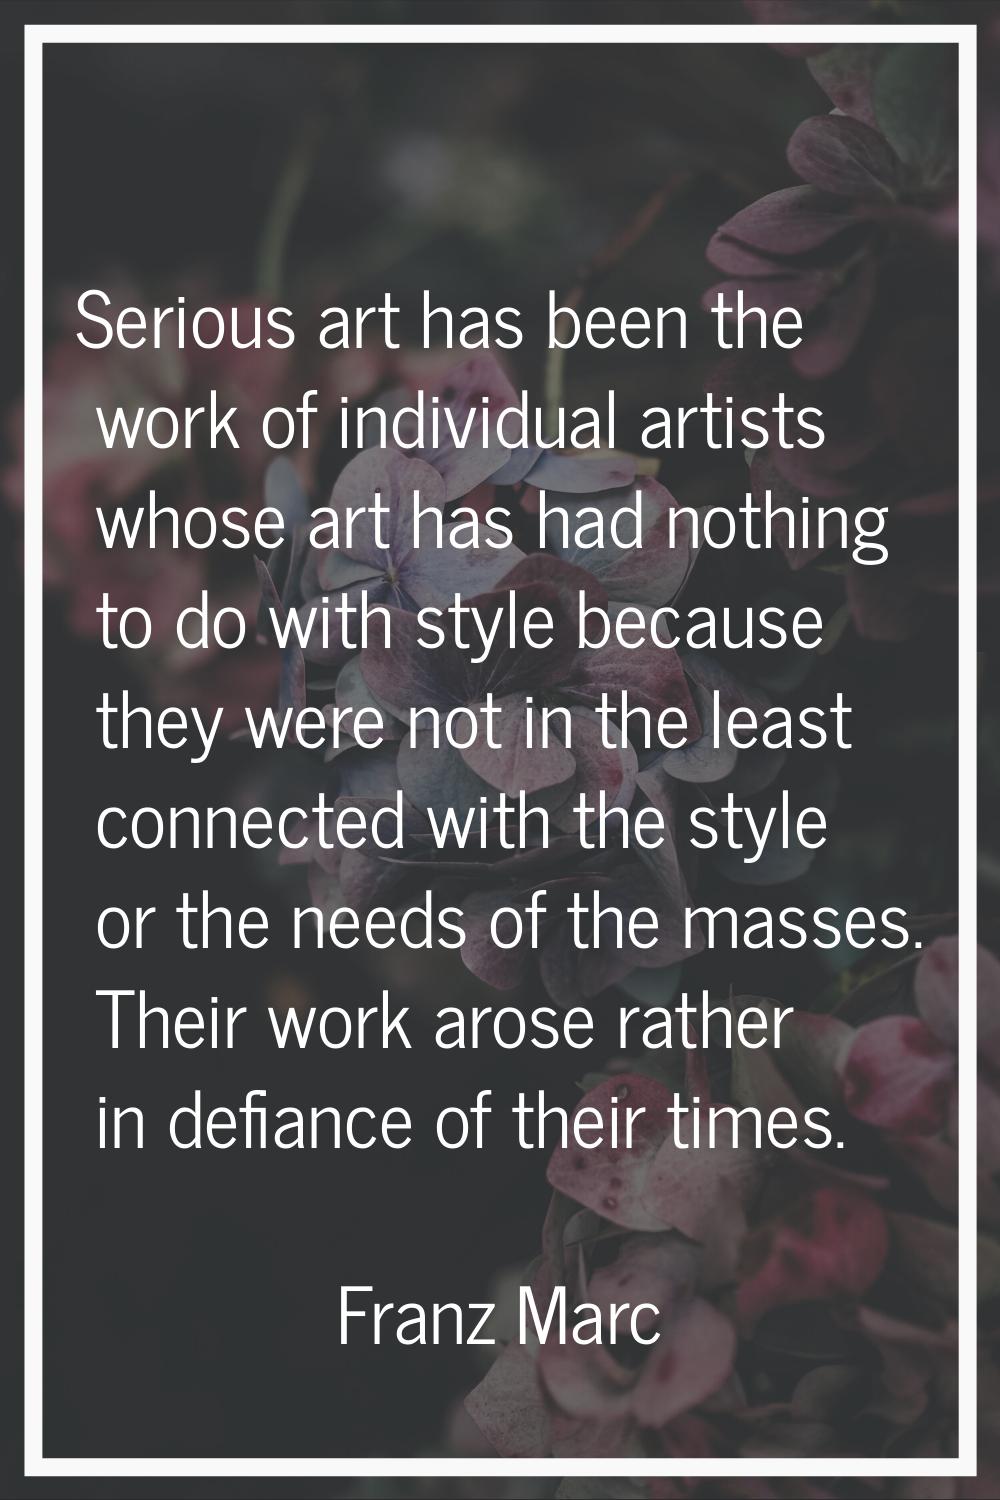 Serious art has been the work of individual artists whose art has had nothing to do with style beca